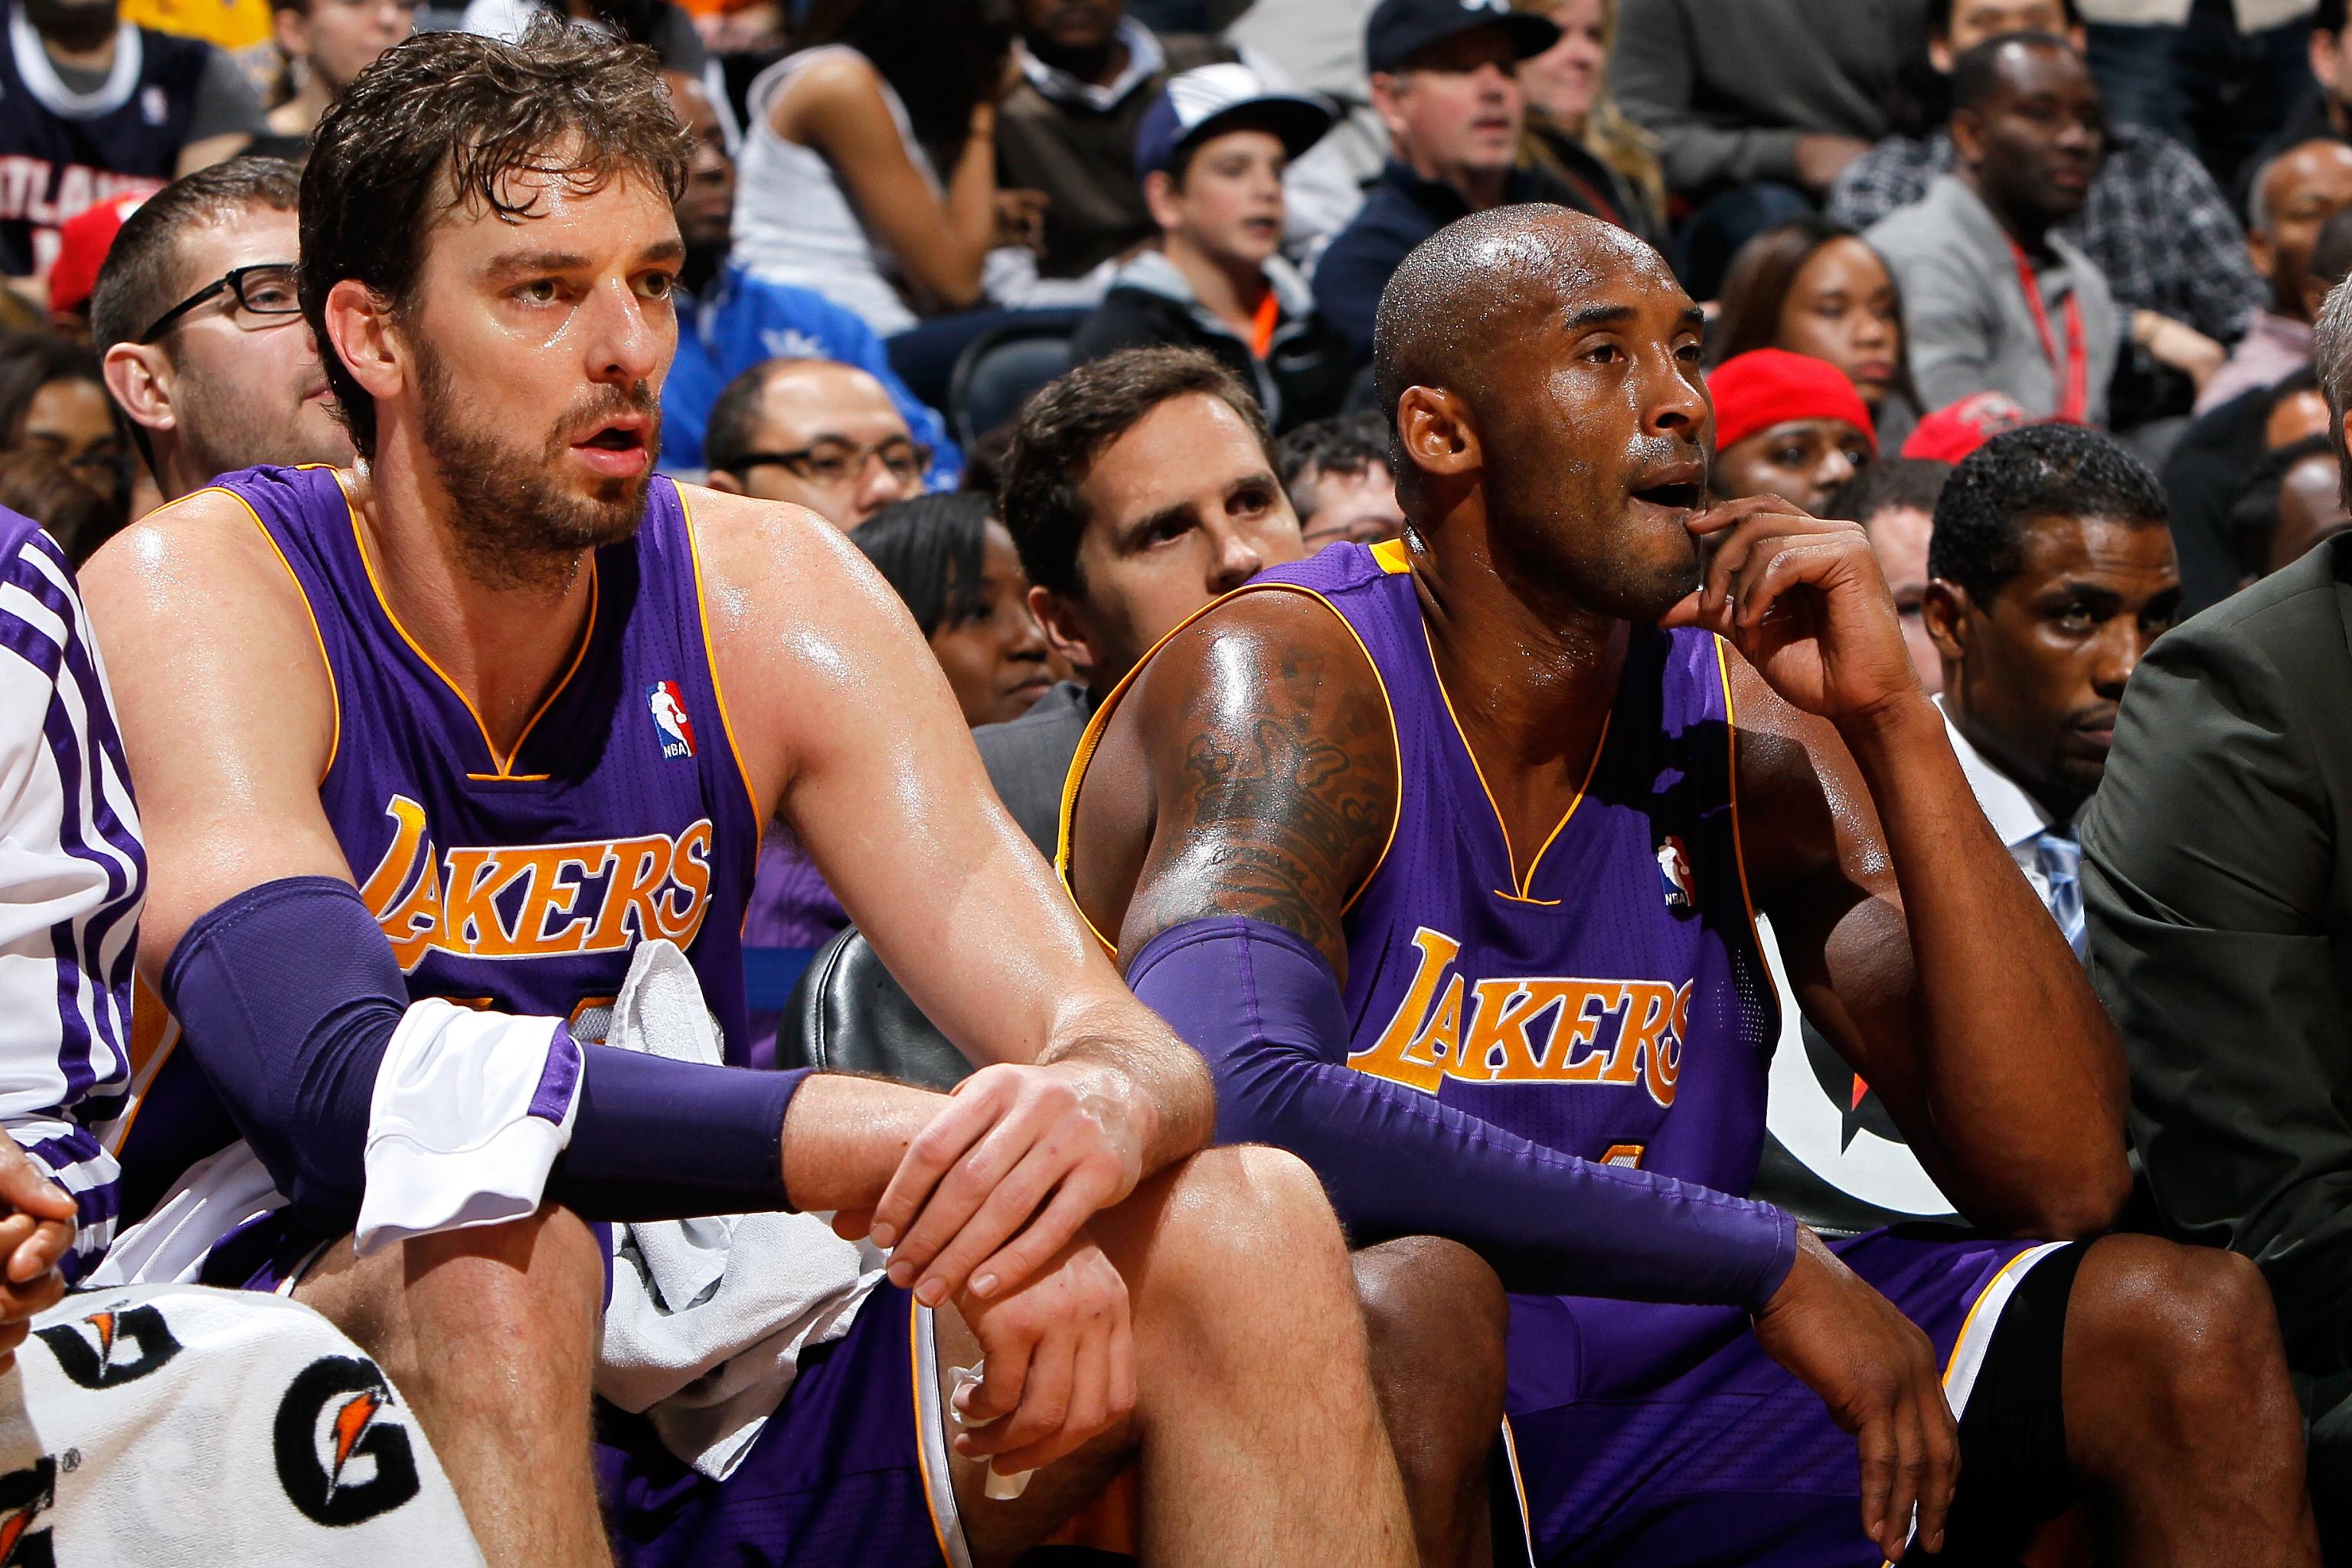 Lakers News: Pau Gasol Felt As Though He Was Playing Game 7 Of